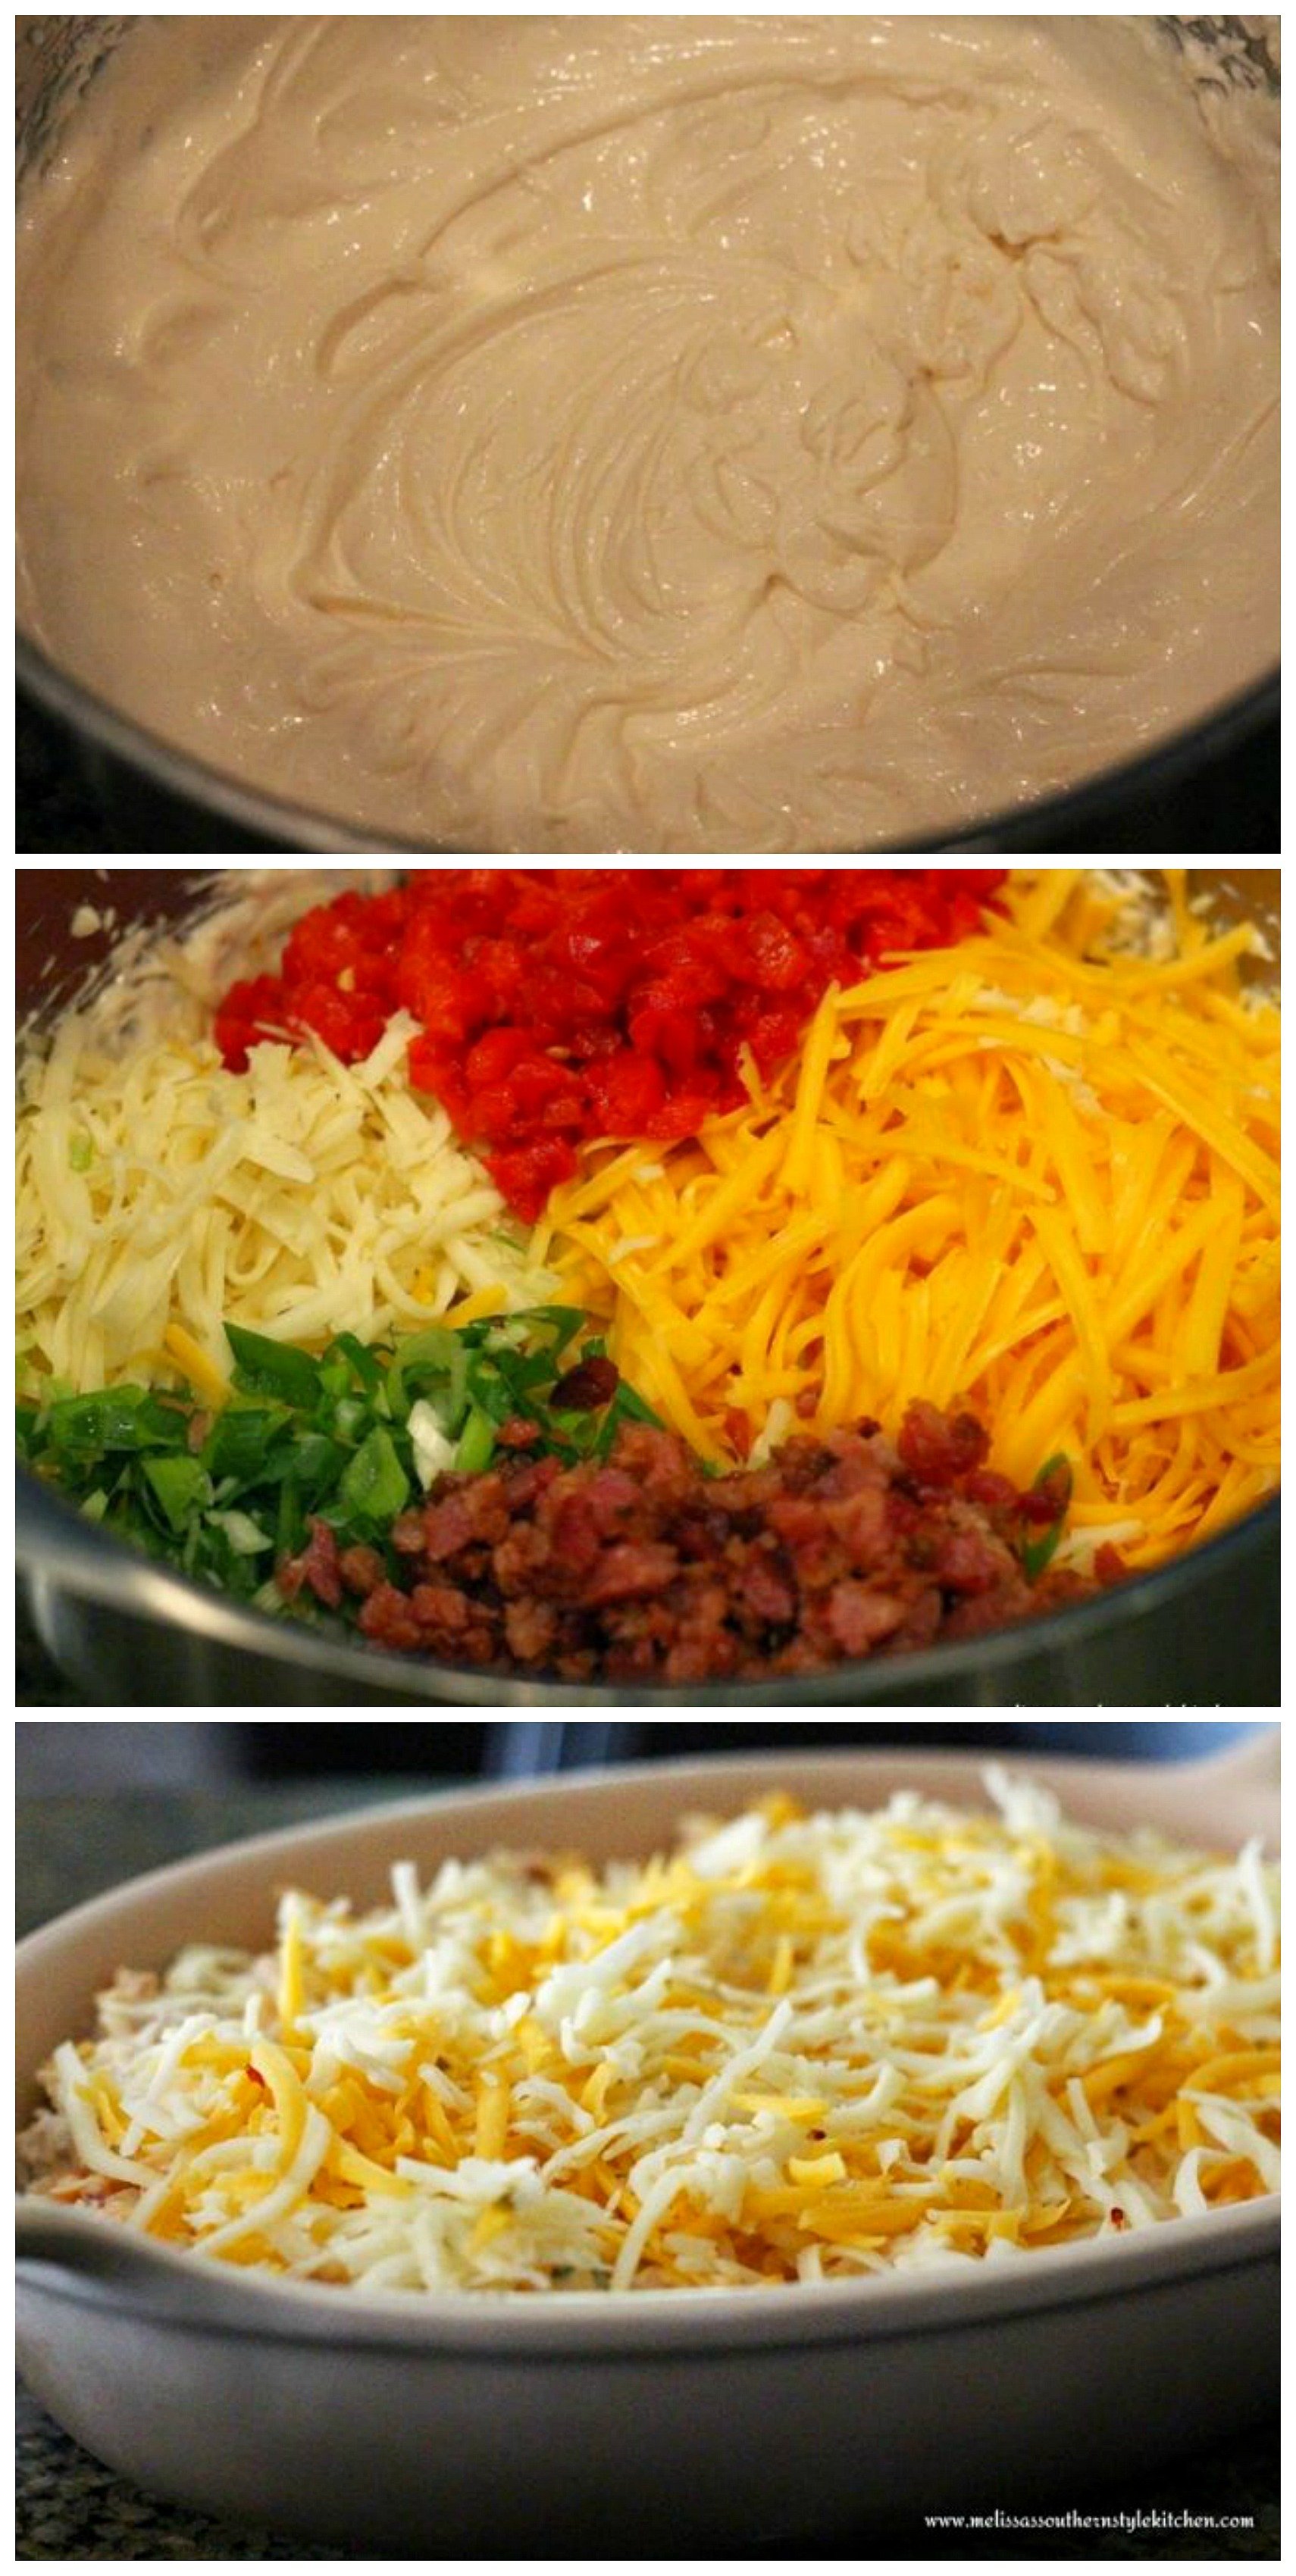 Step-by-step images and ingredients for Hot Pimento Cheese Dip